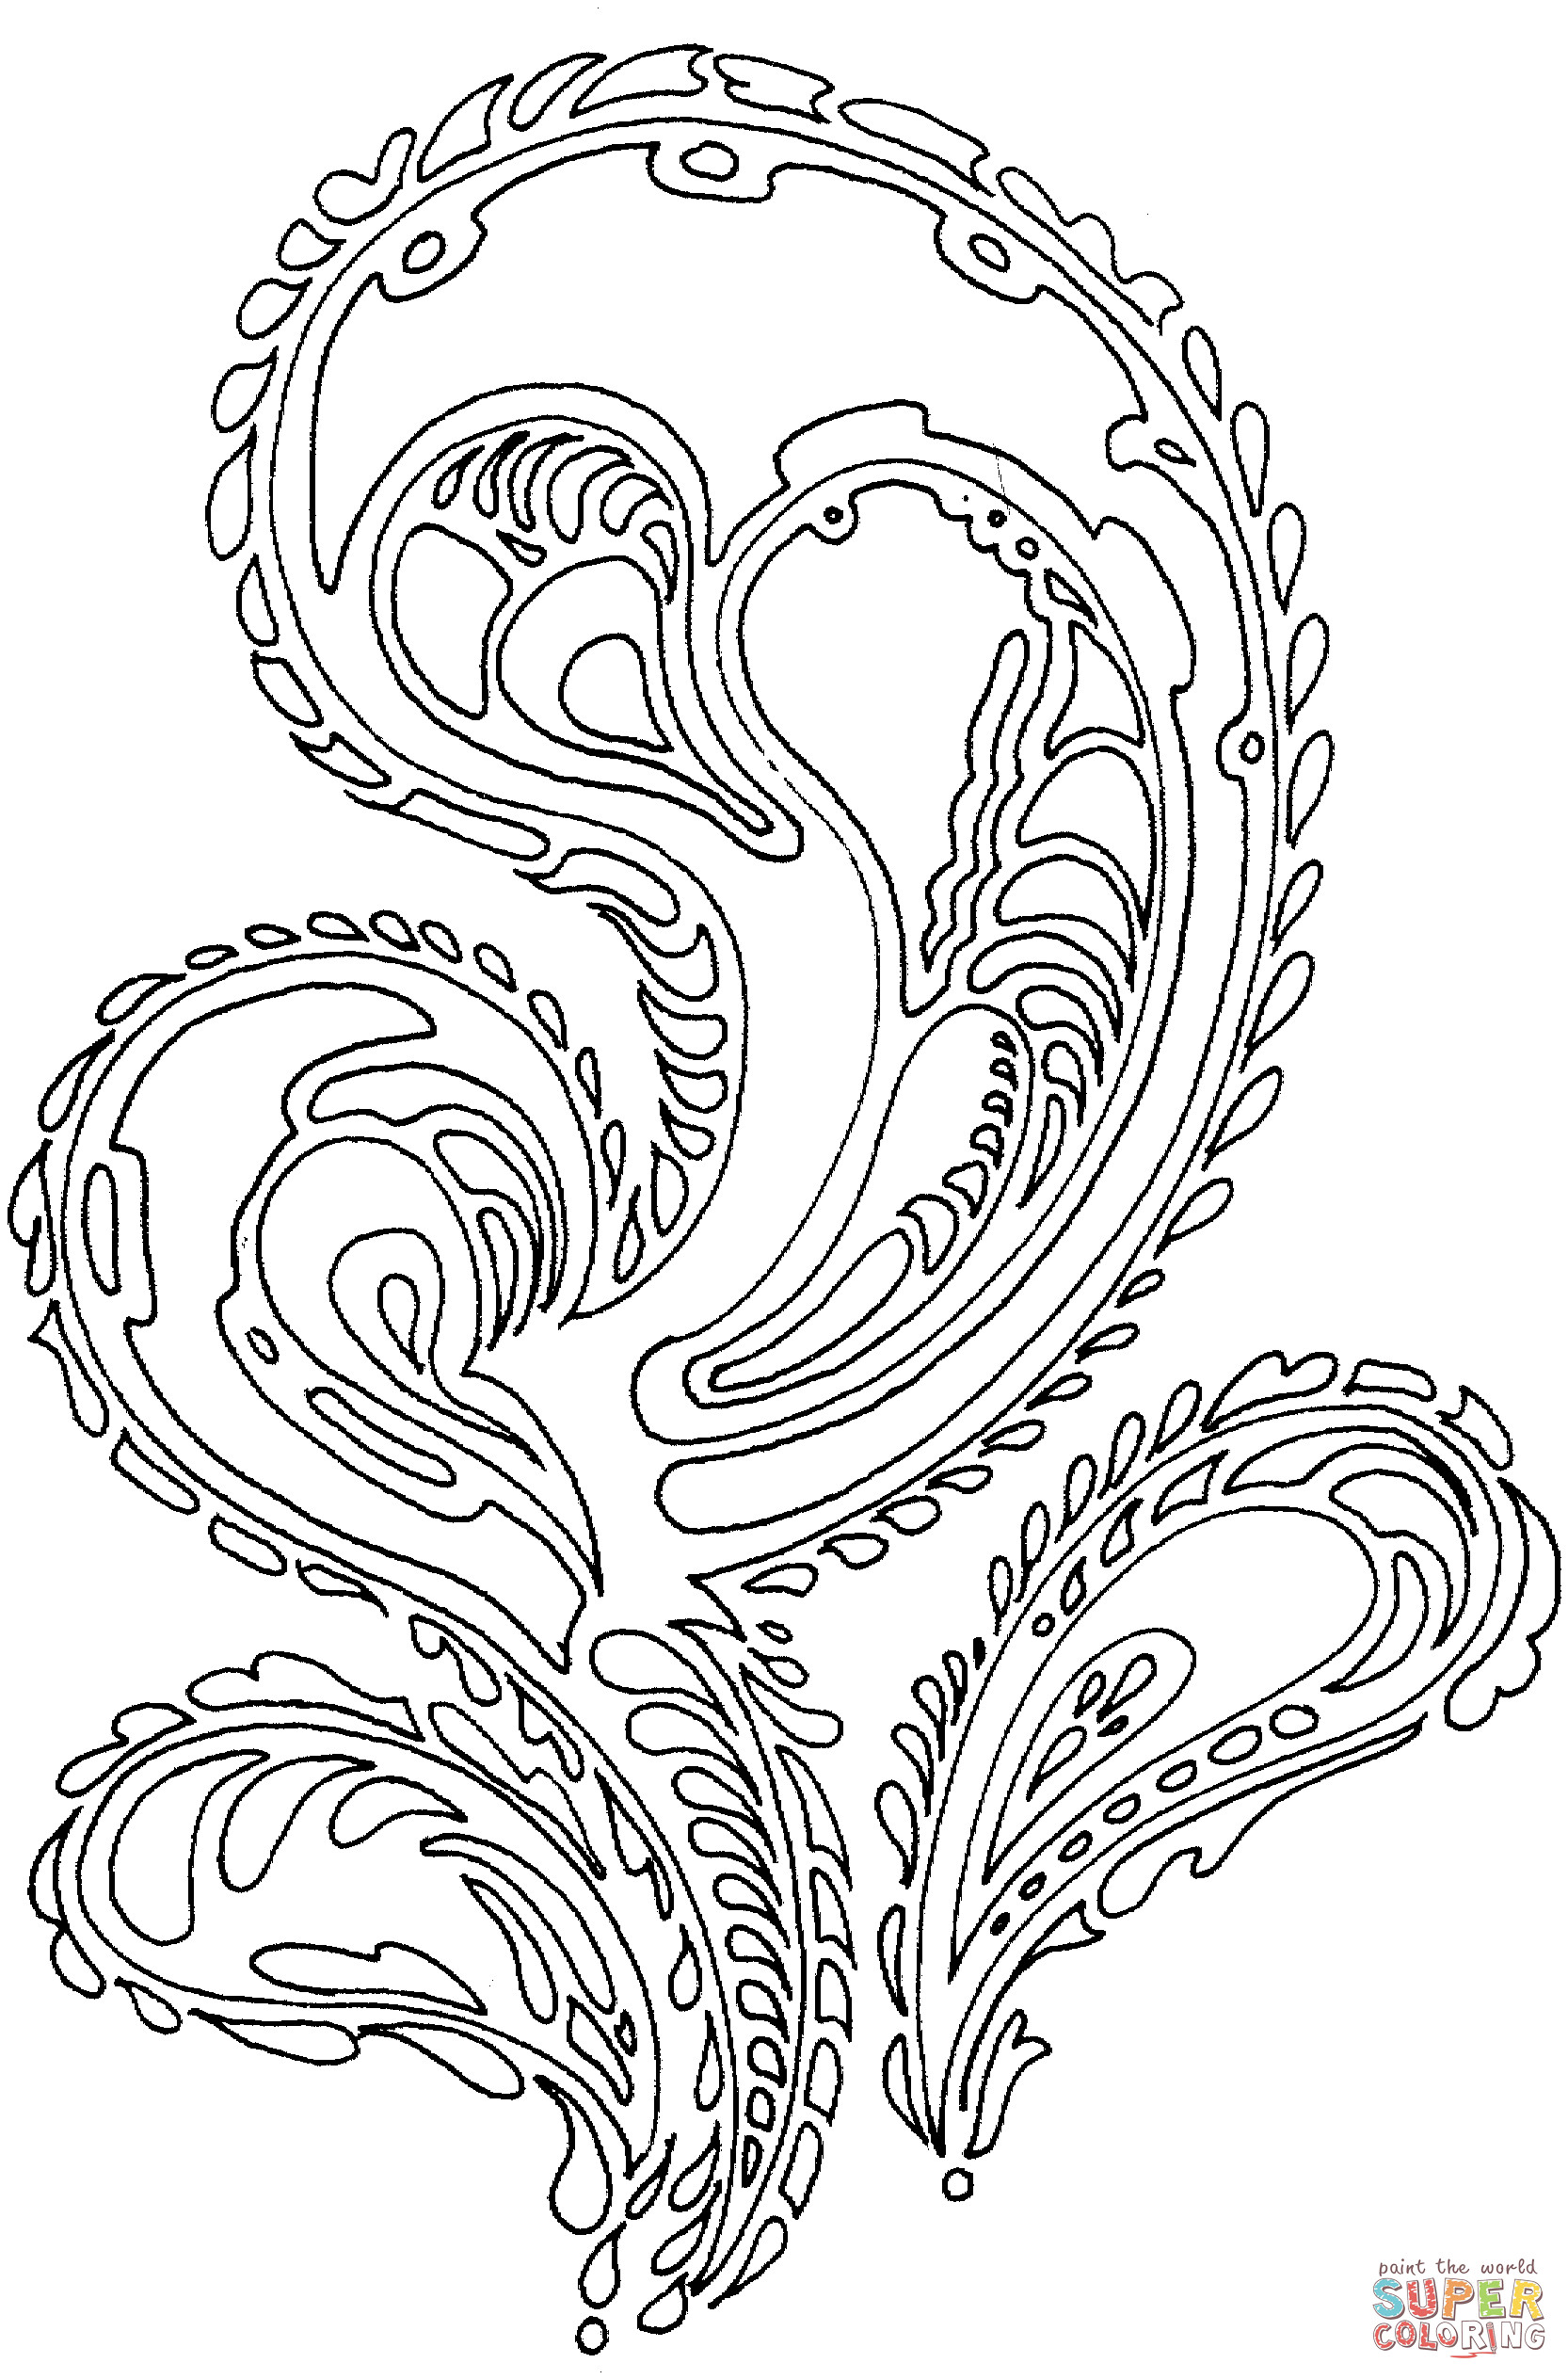 Paisley Printable Coloring Pages
 Paisley Peacock Coloring Pages For Adults Printable Sketch